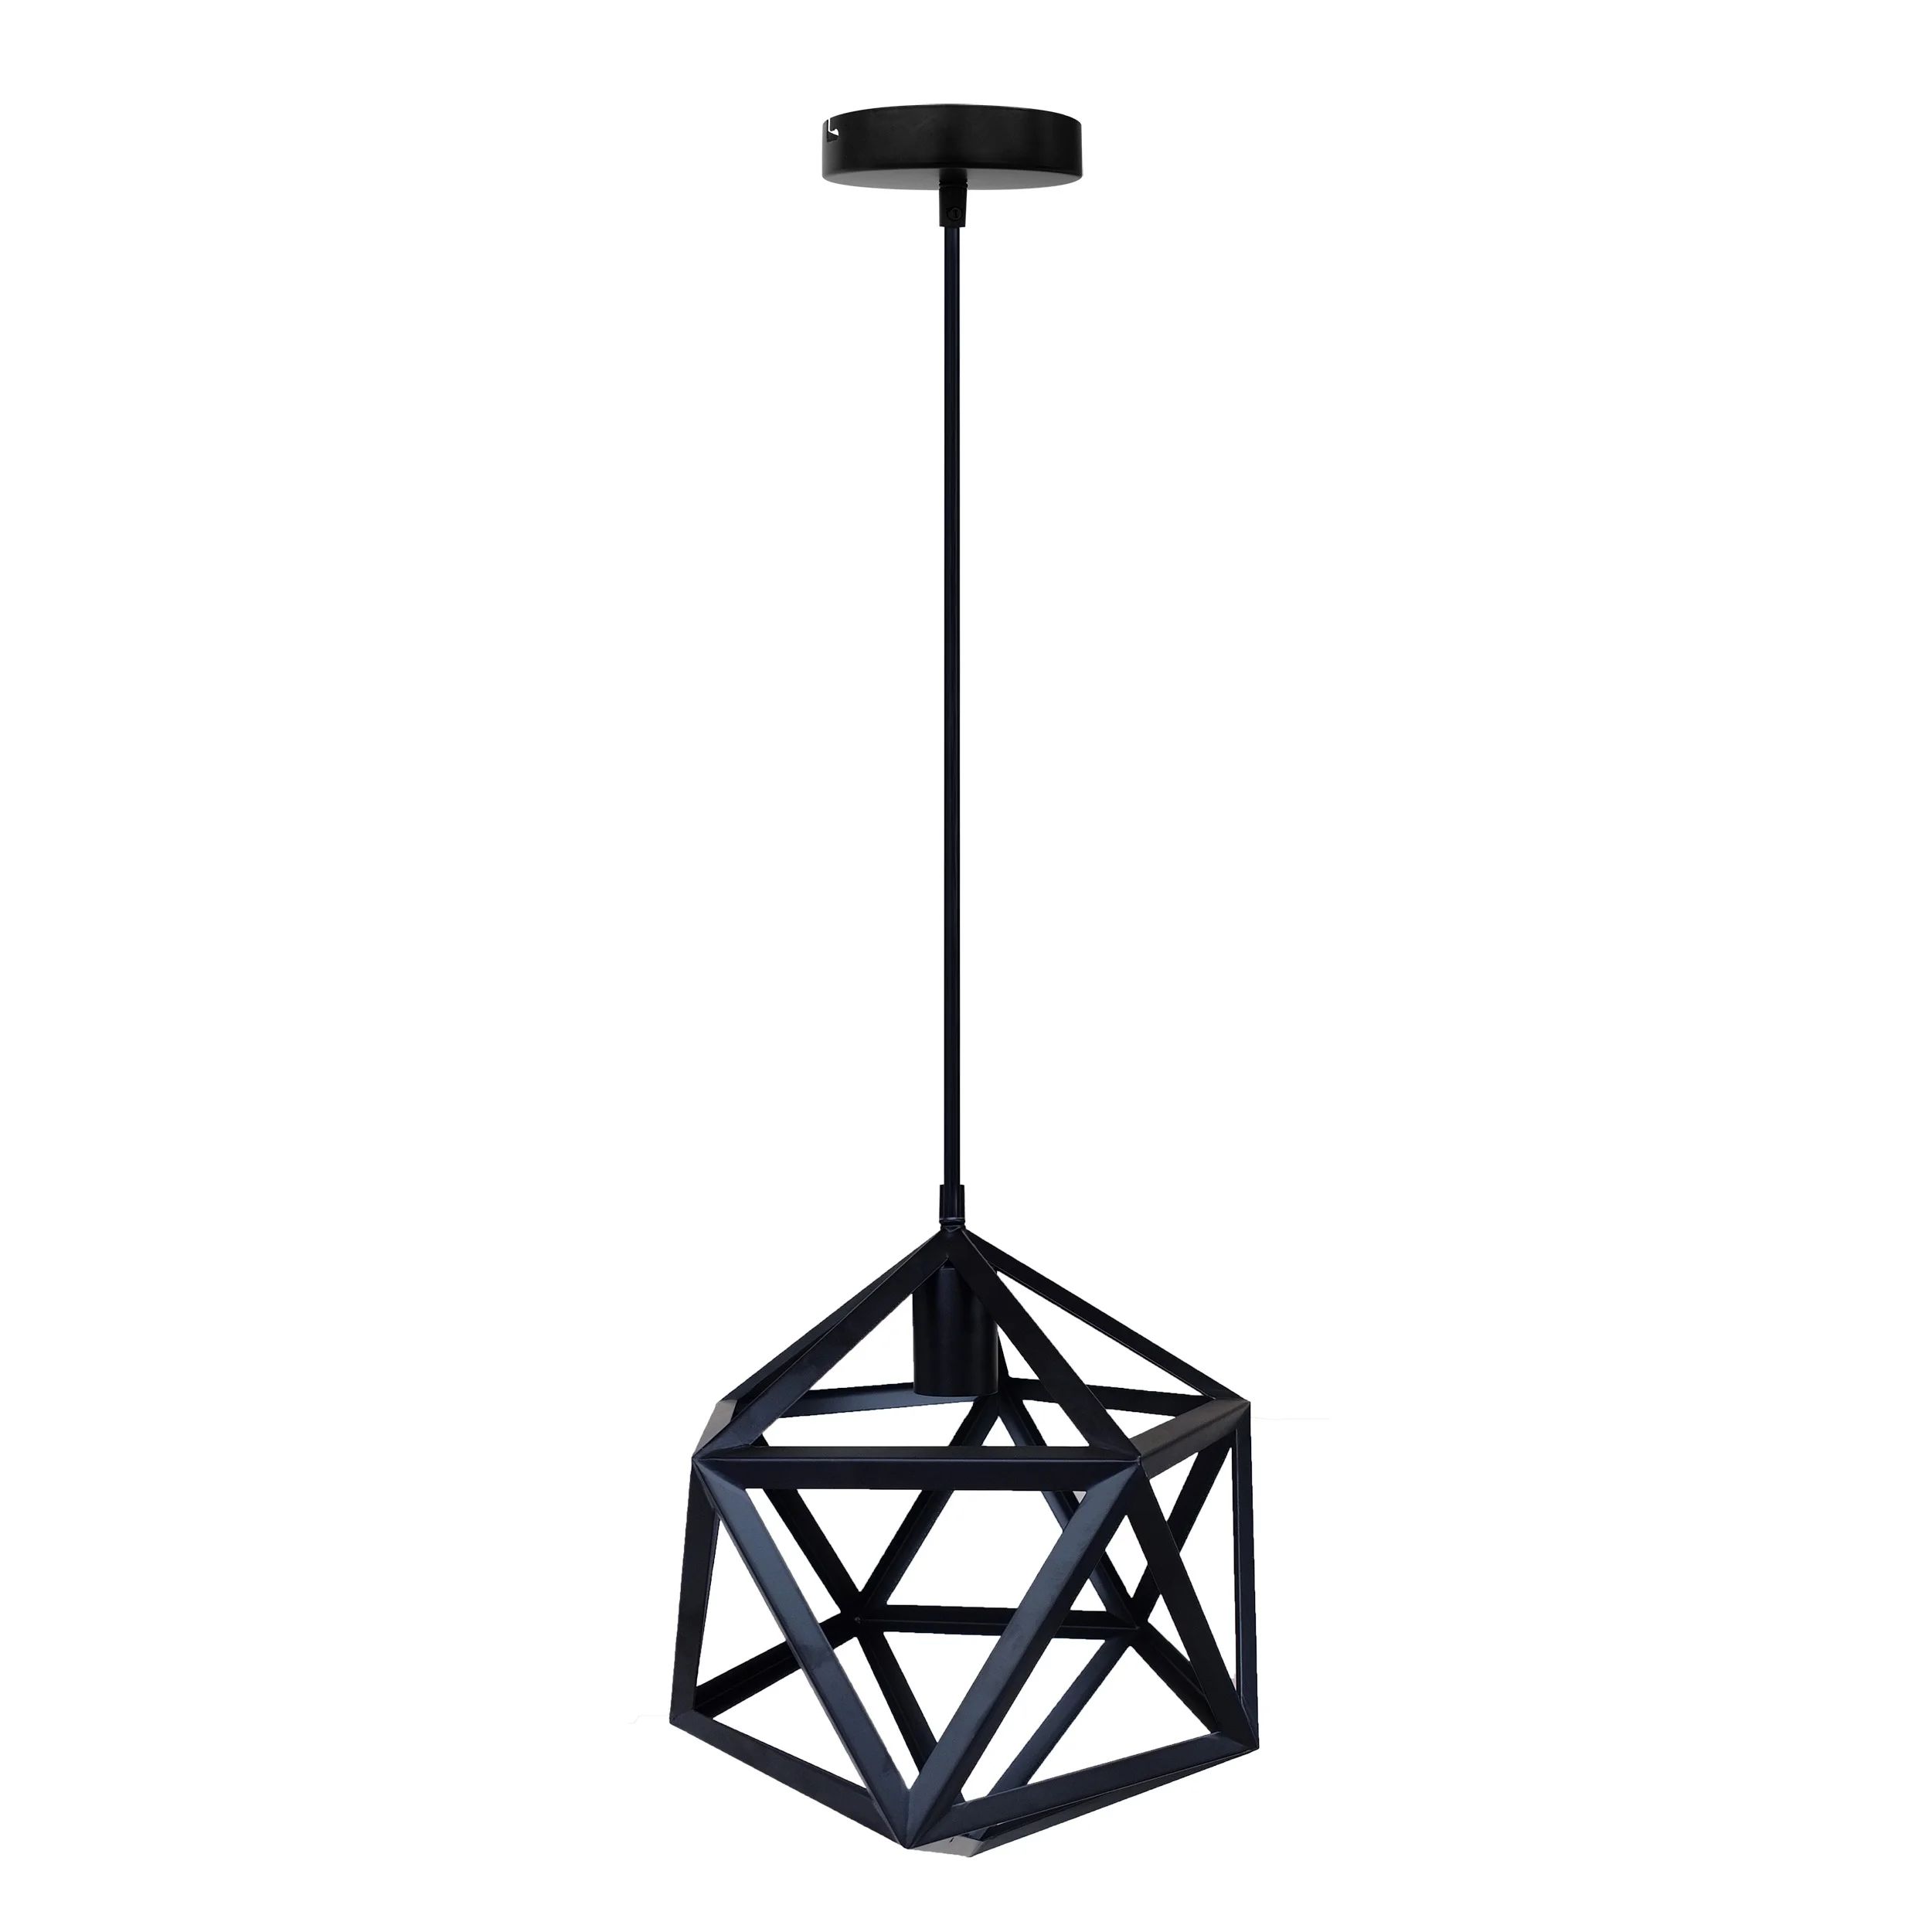 Antiquated Black Cage Metal Pendant lamp With E27 Lampholder